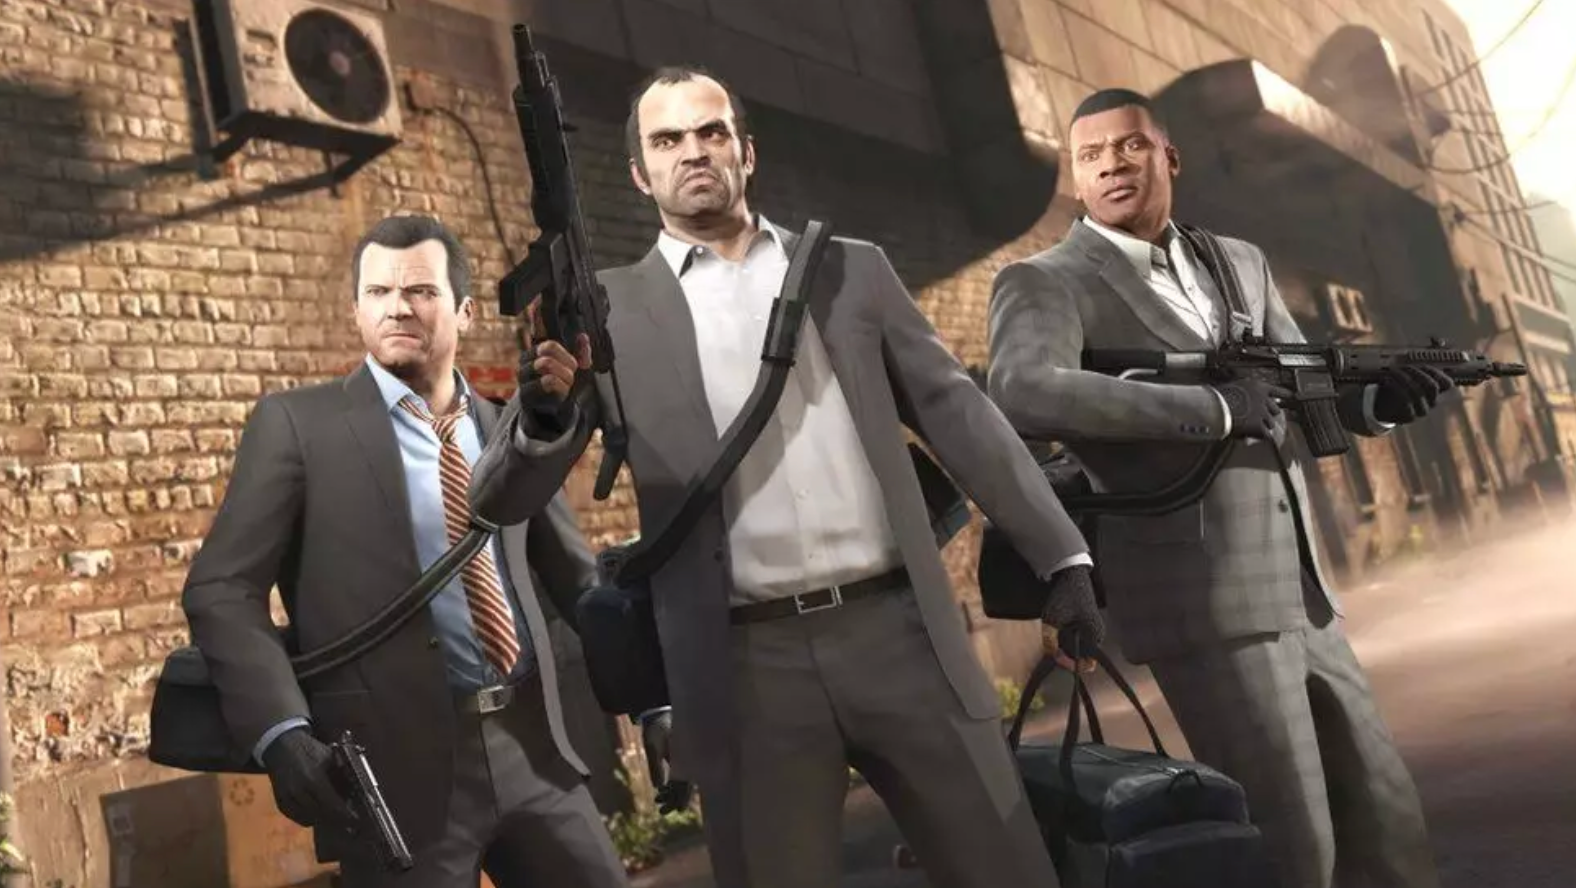 GTA 6 set to be the most expensive video game ever